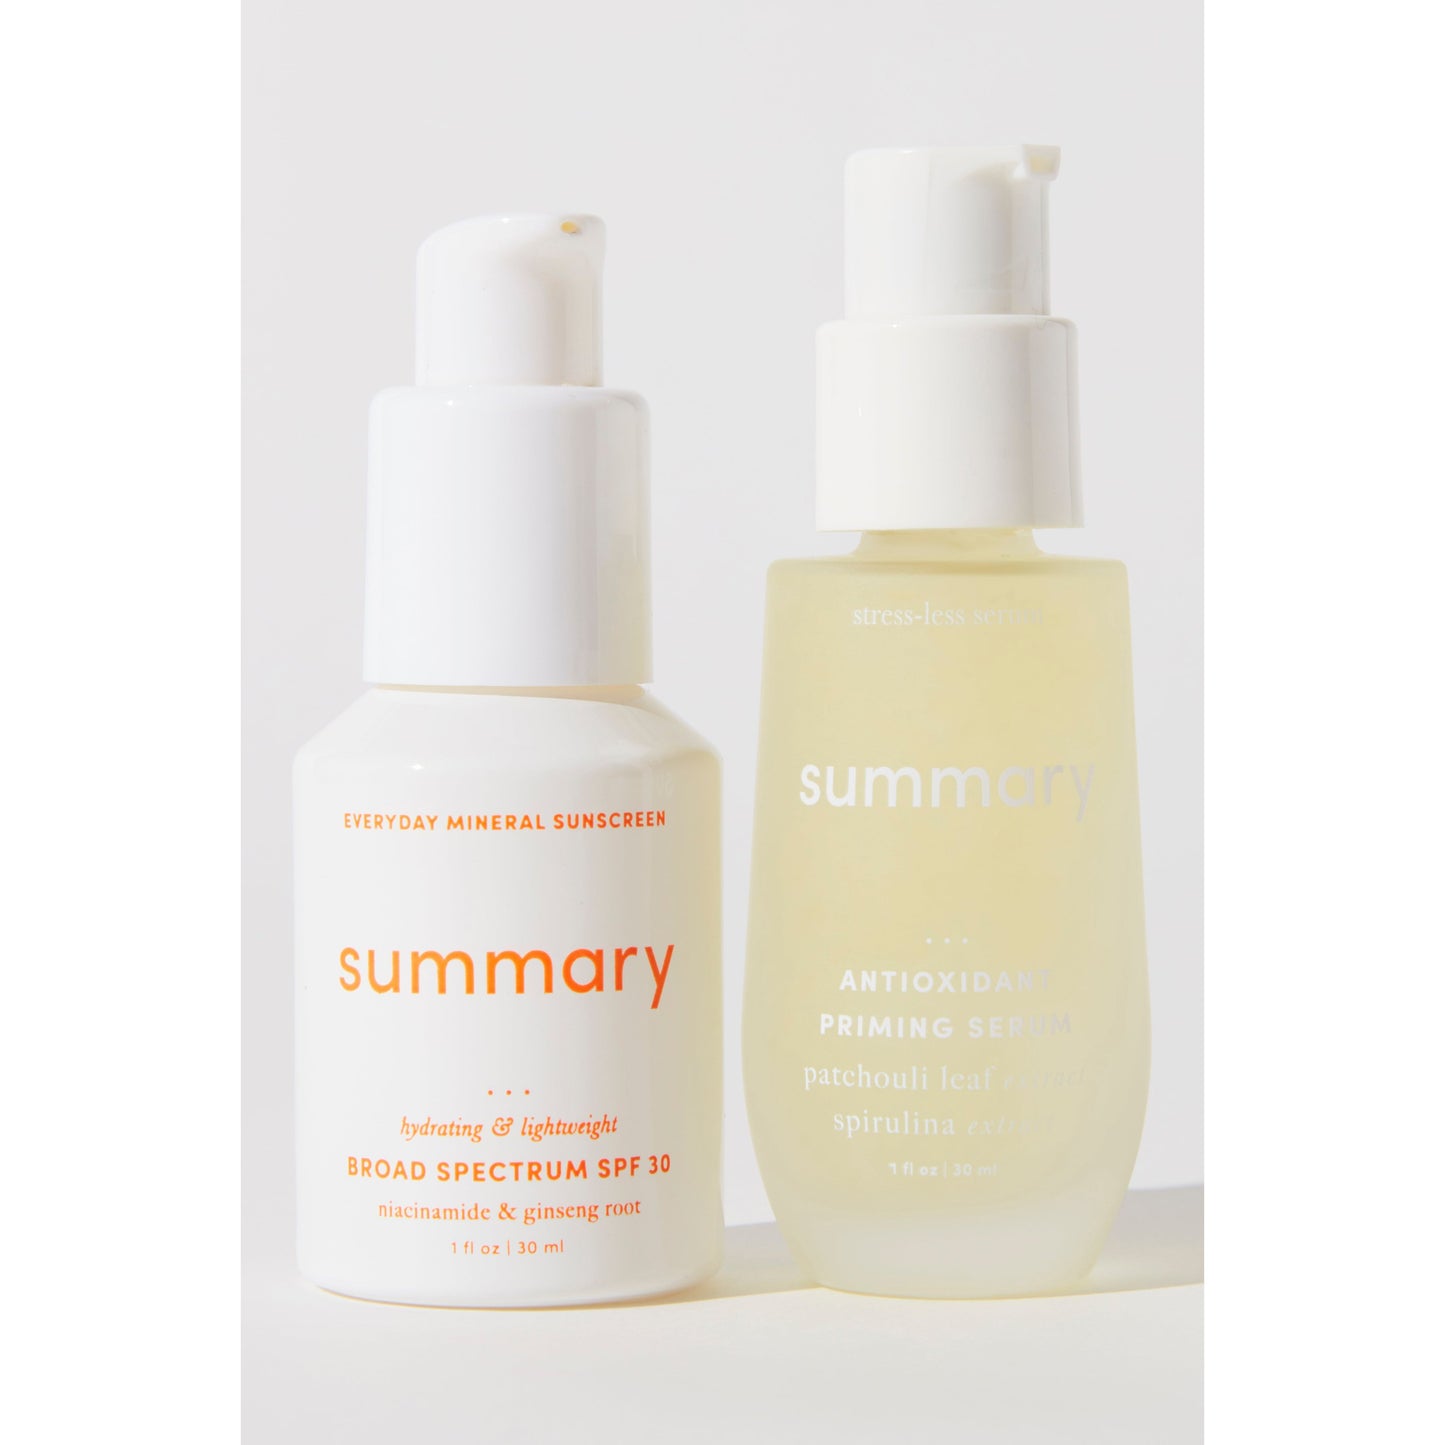 Two skincare bottles labeled "Summary SPF 30," one a mineral-based sunscreen and the other an antioxidant serum, against a white background.